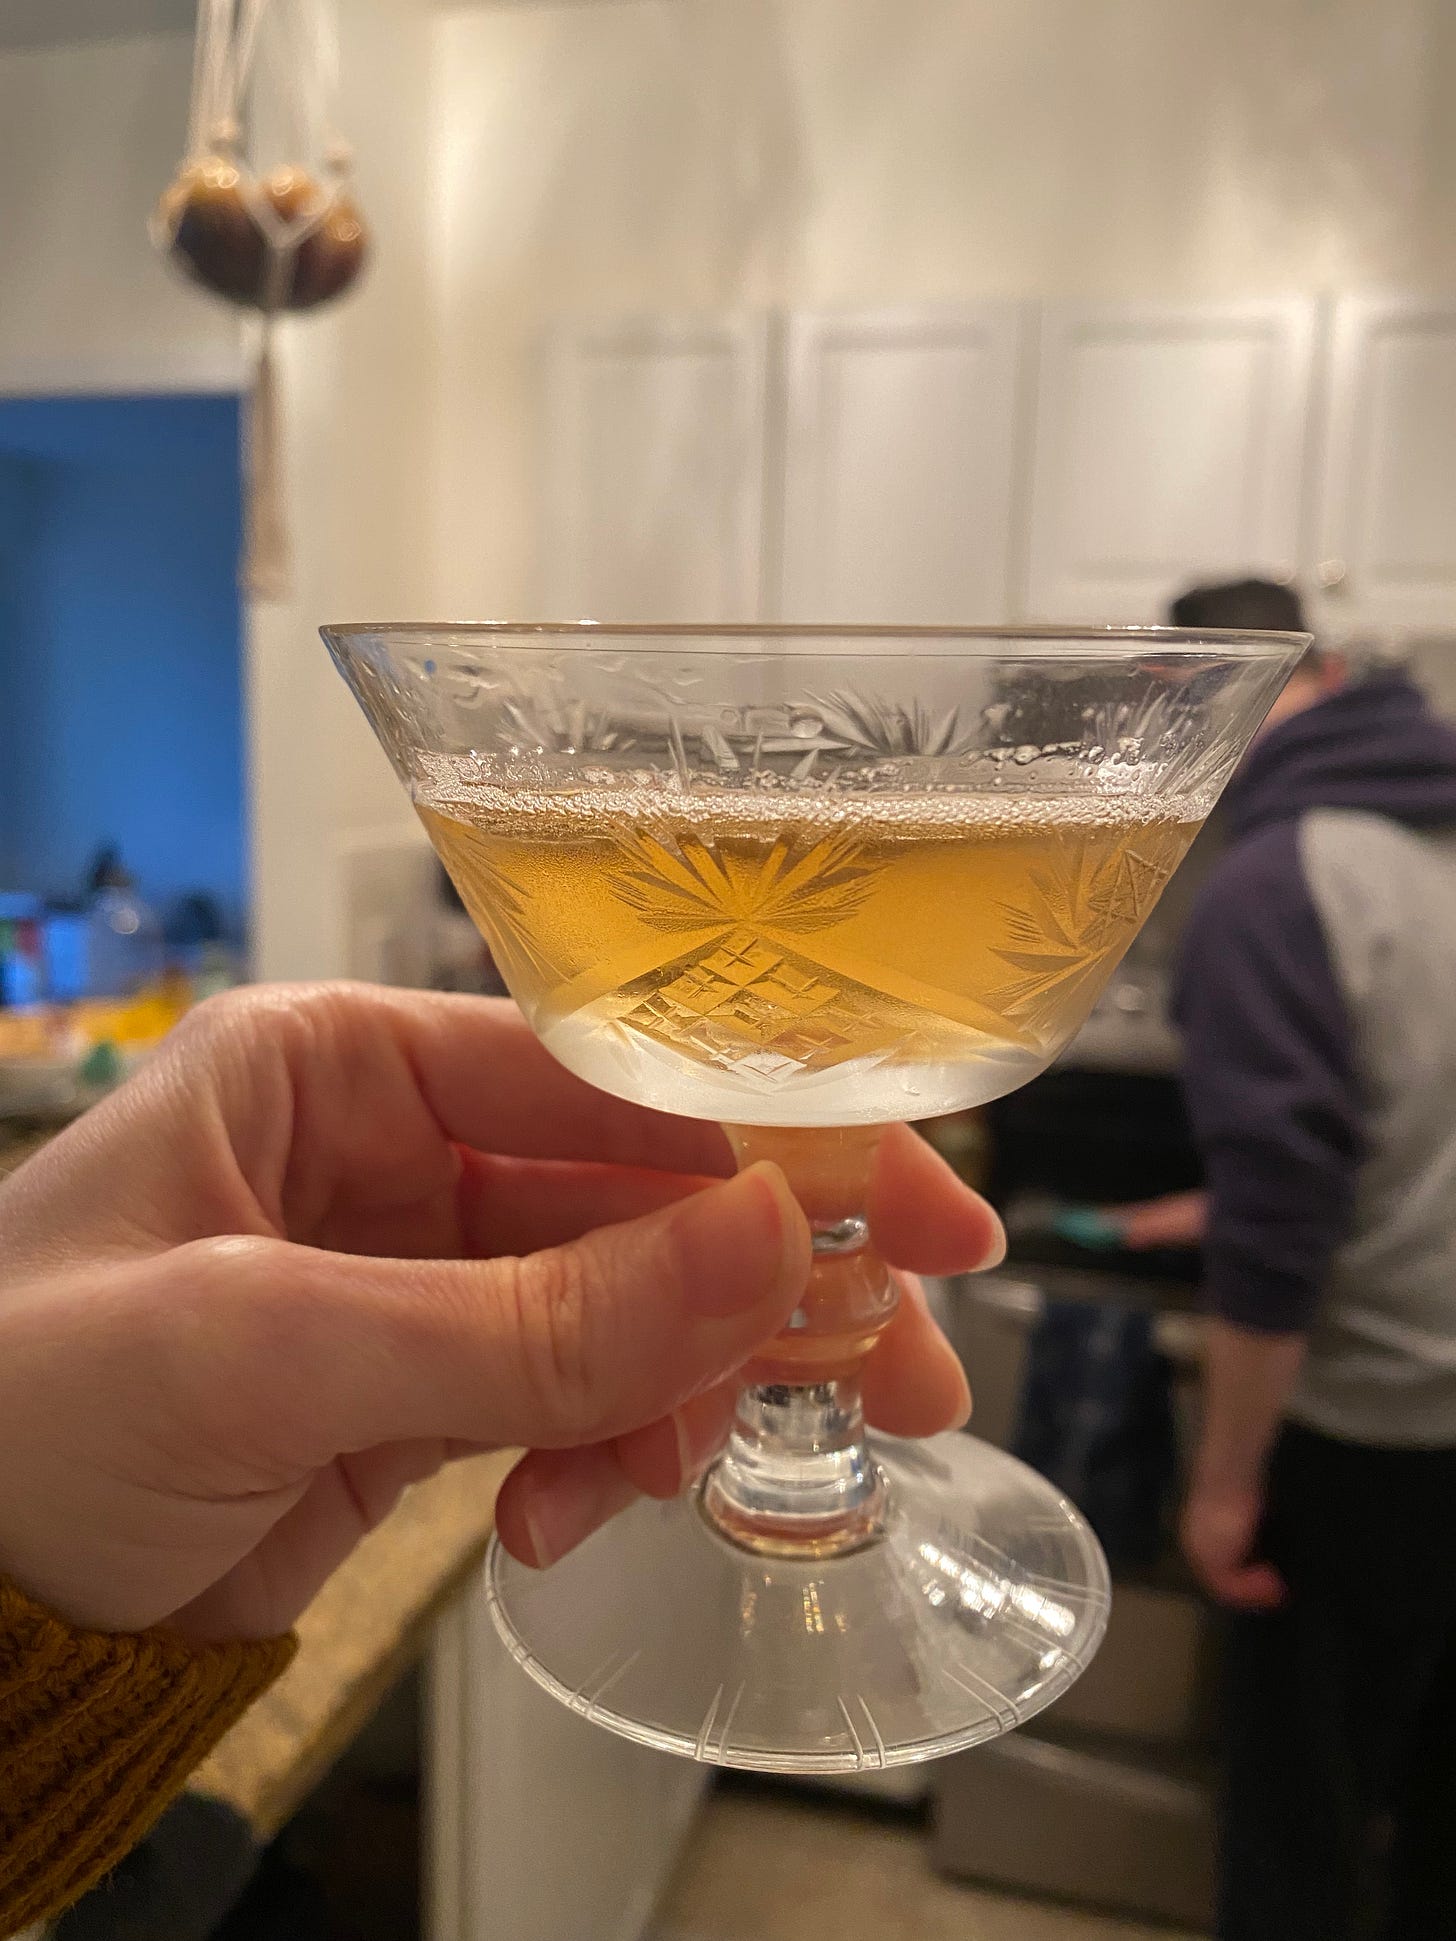 The etched glass described above, with a stylized pineapple visible in the design. I'm holding it up in the kitchen, it's about 3/4 full with a honey-coloured drink. Jeff is wiping the stove in the background, wearing a blue and grey hoodie.